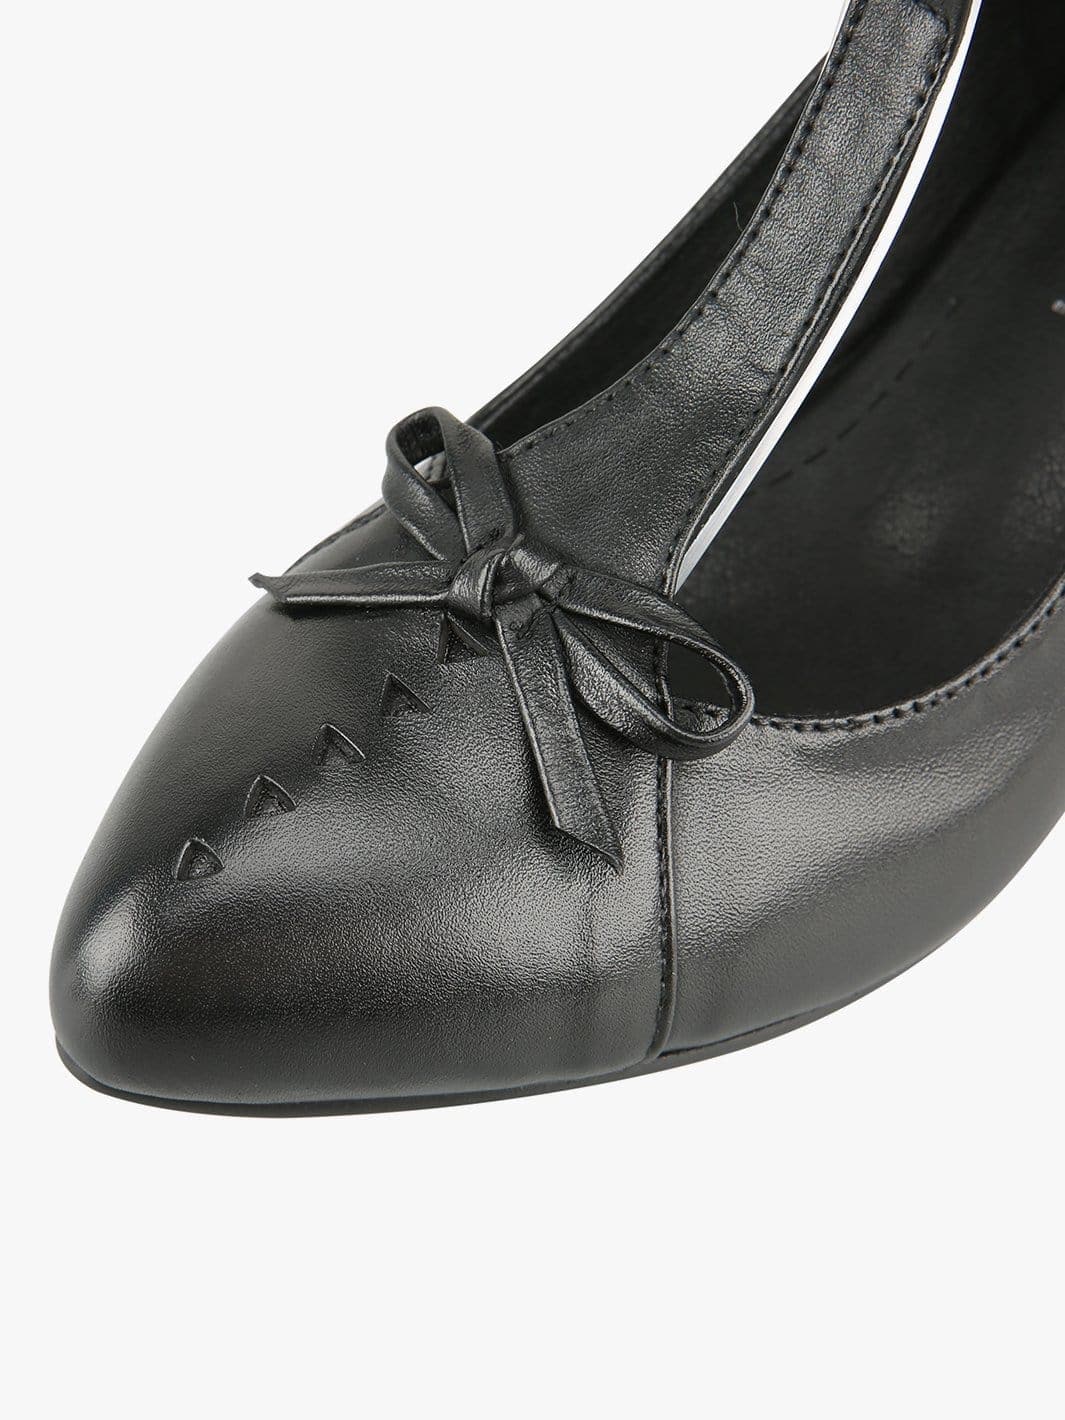 Women‘s Pointed-toe Leather Shoes